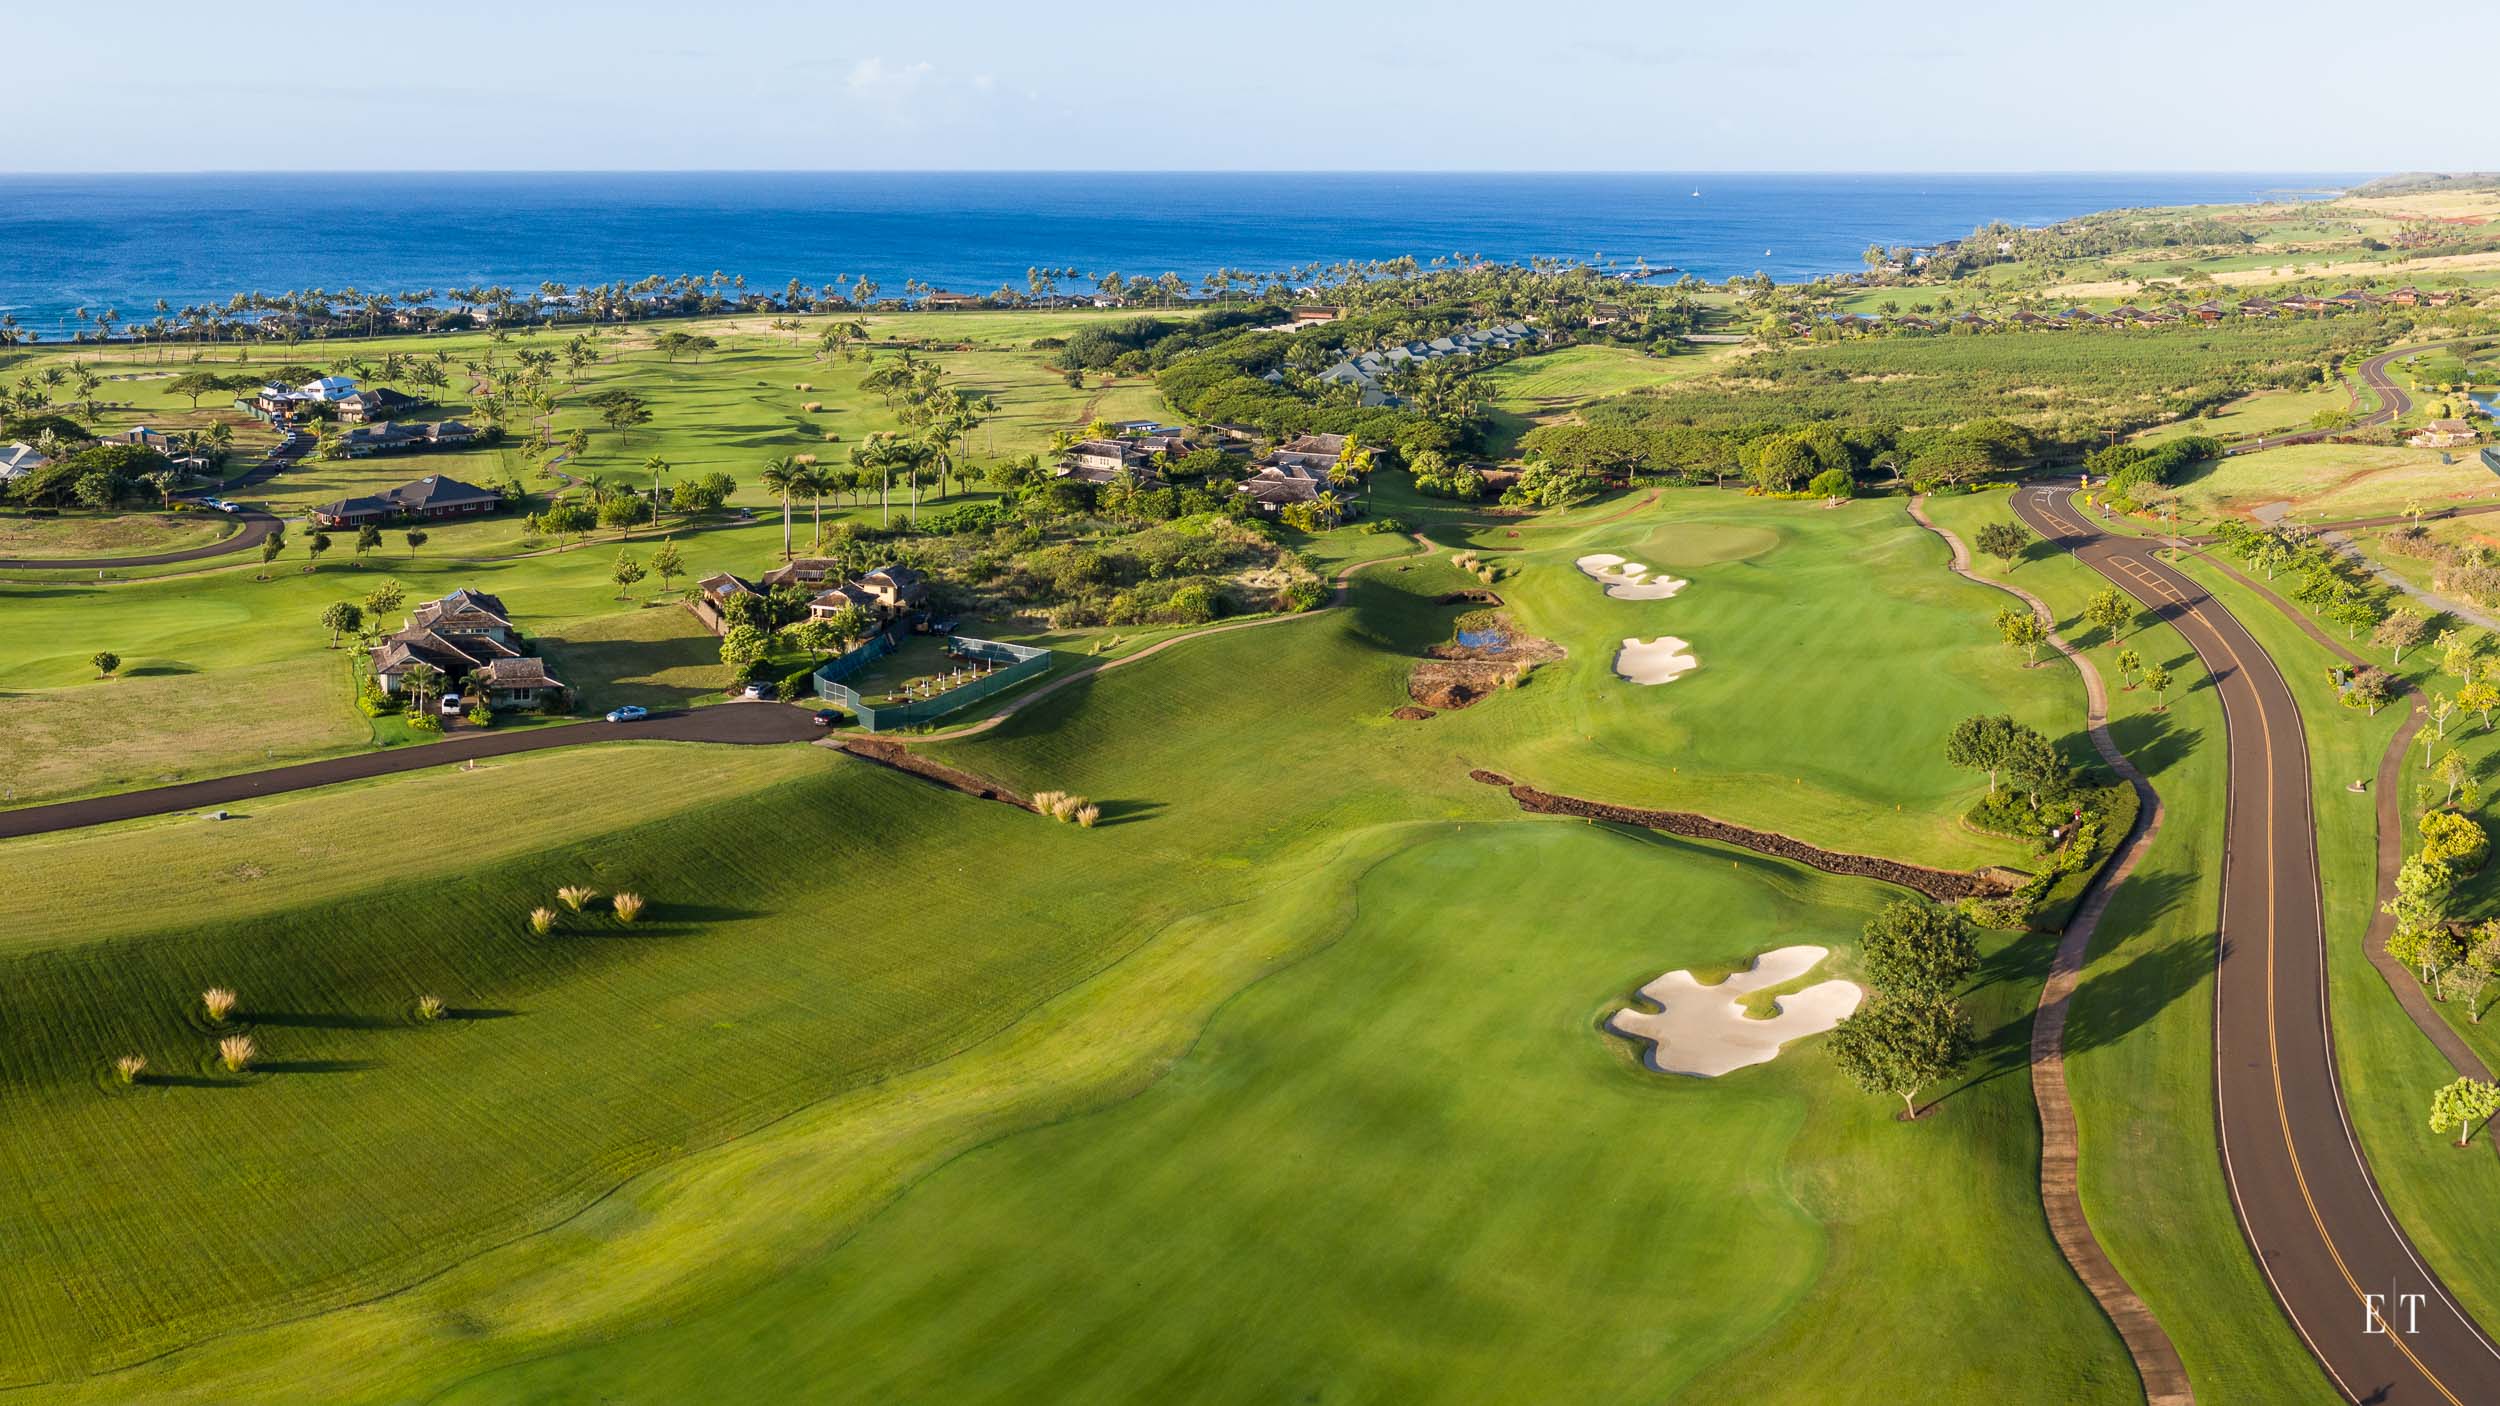 Aerial of the Kukuiula Golf Course from the house